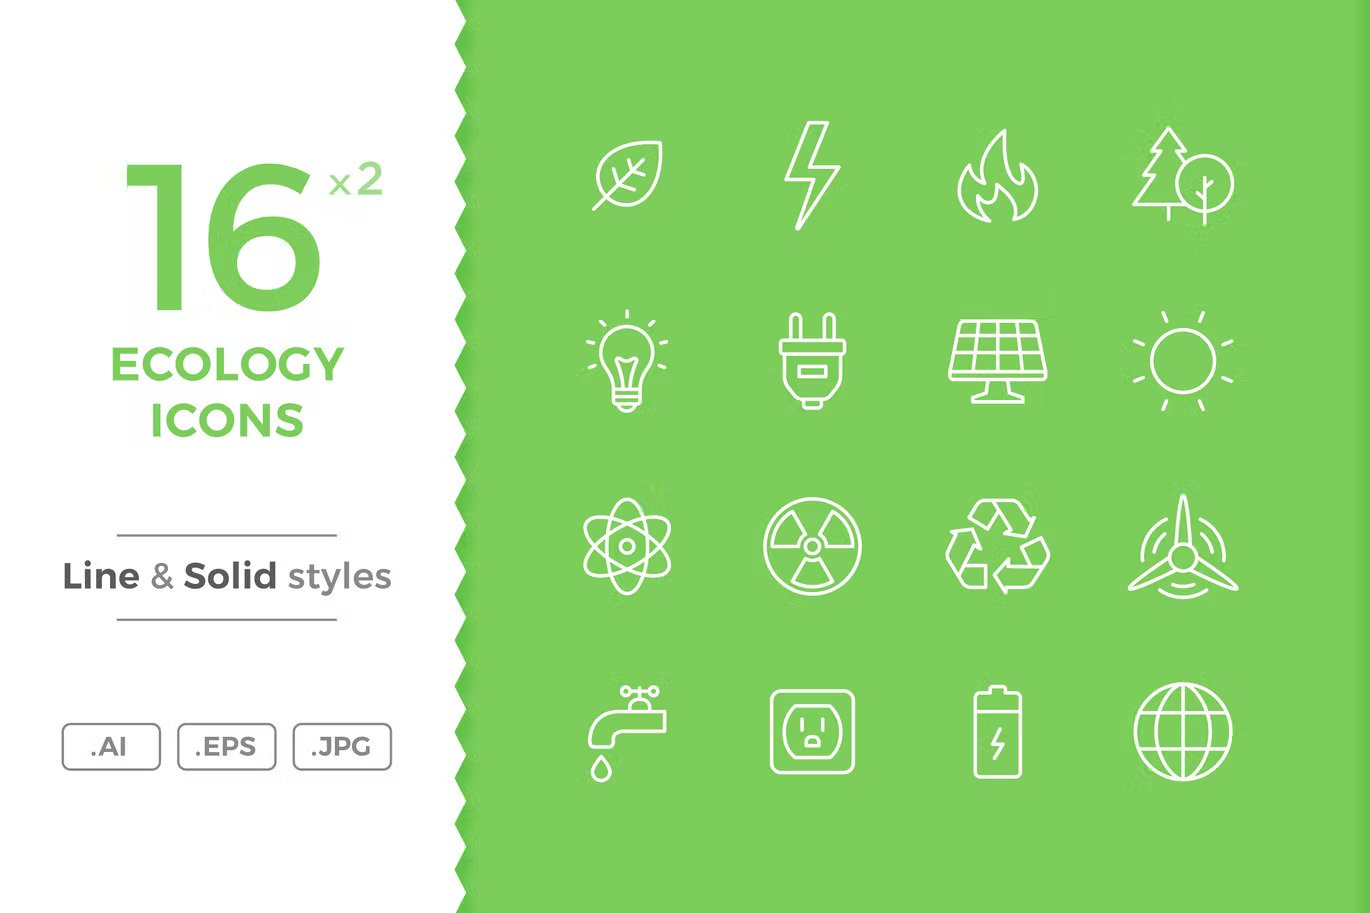 Sixteen ecology icons in line and solid styles